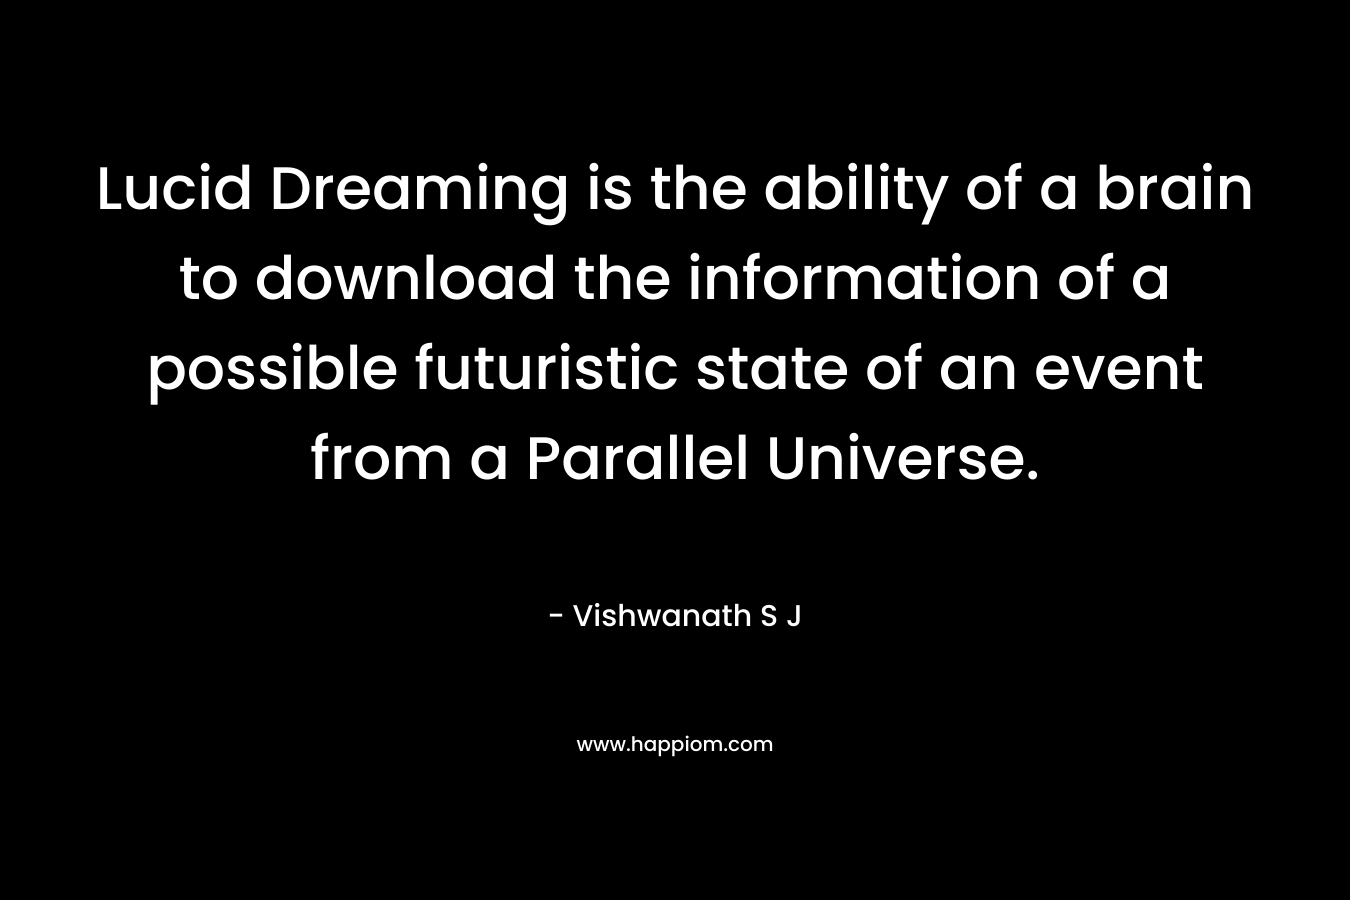 Lucid Dreaming is the ability of a brain to download the information of a possible futuristic state of an event from a Parallel Universe.